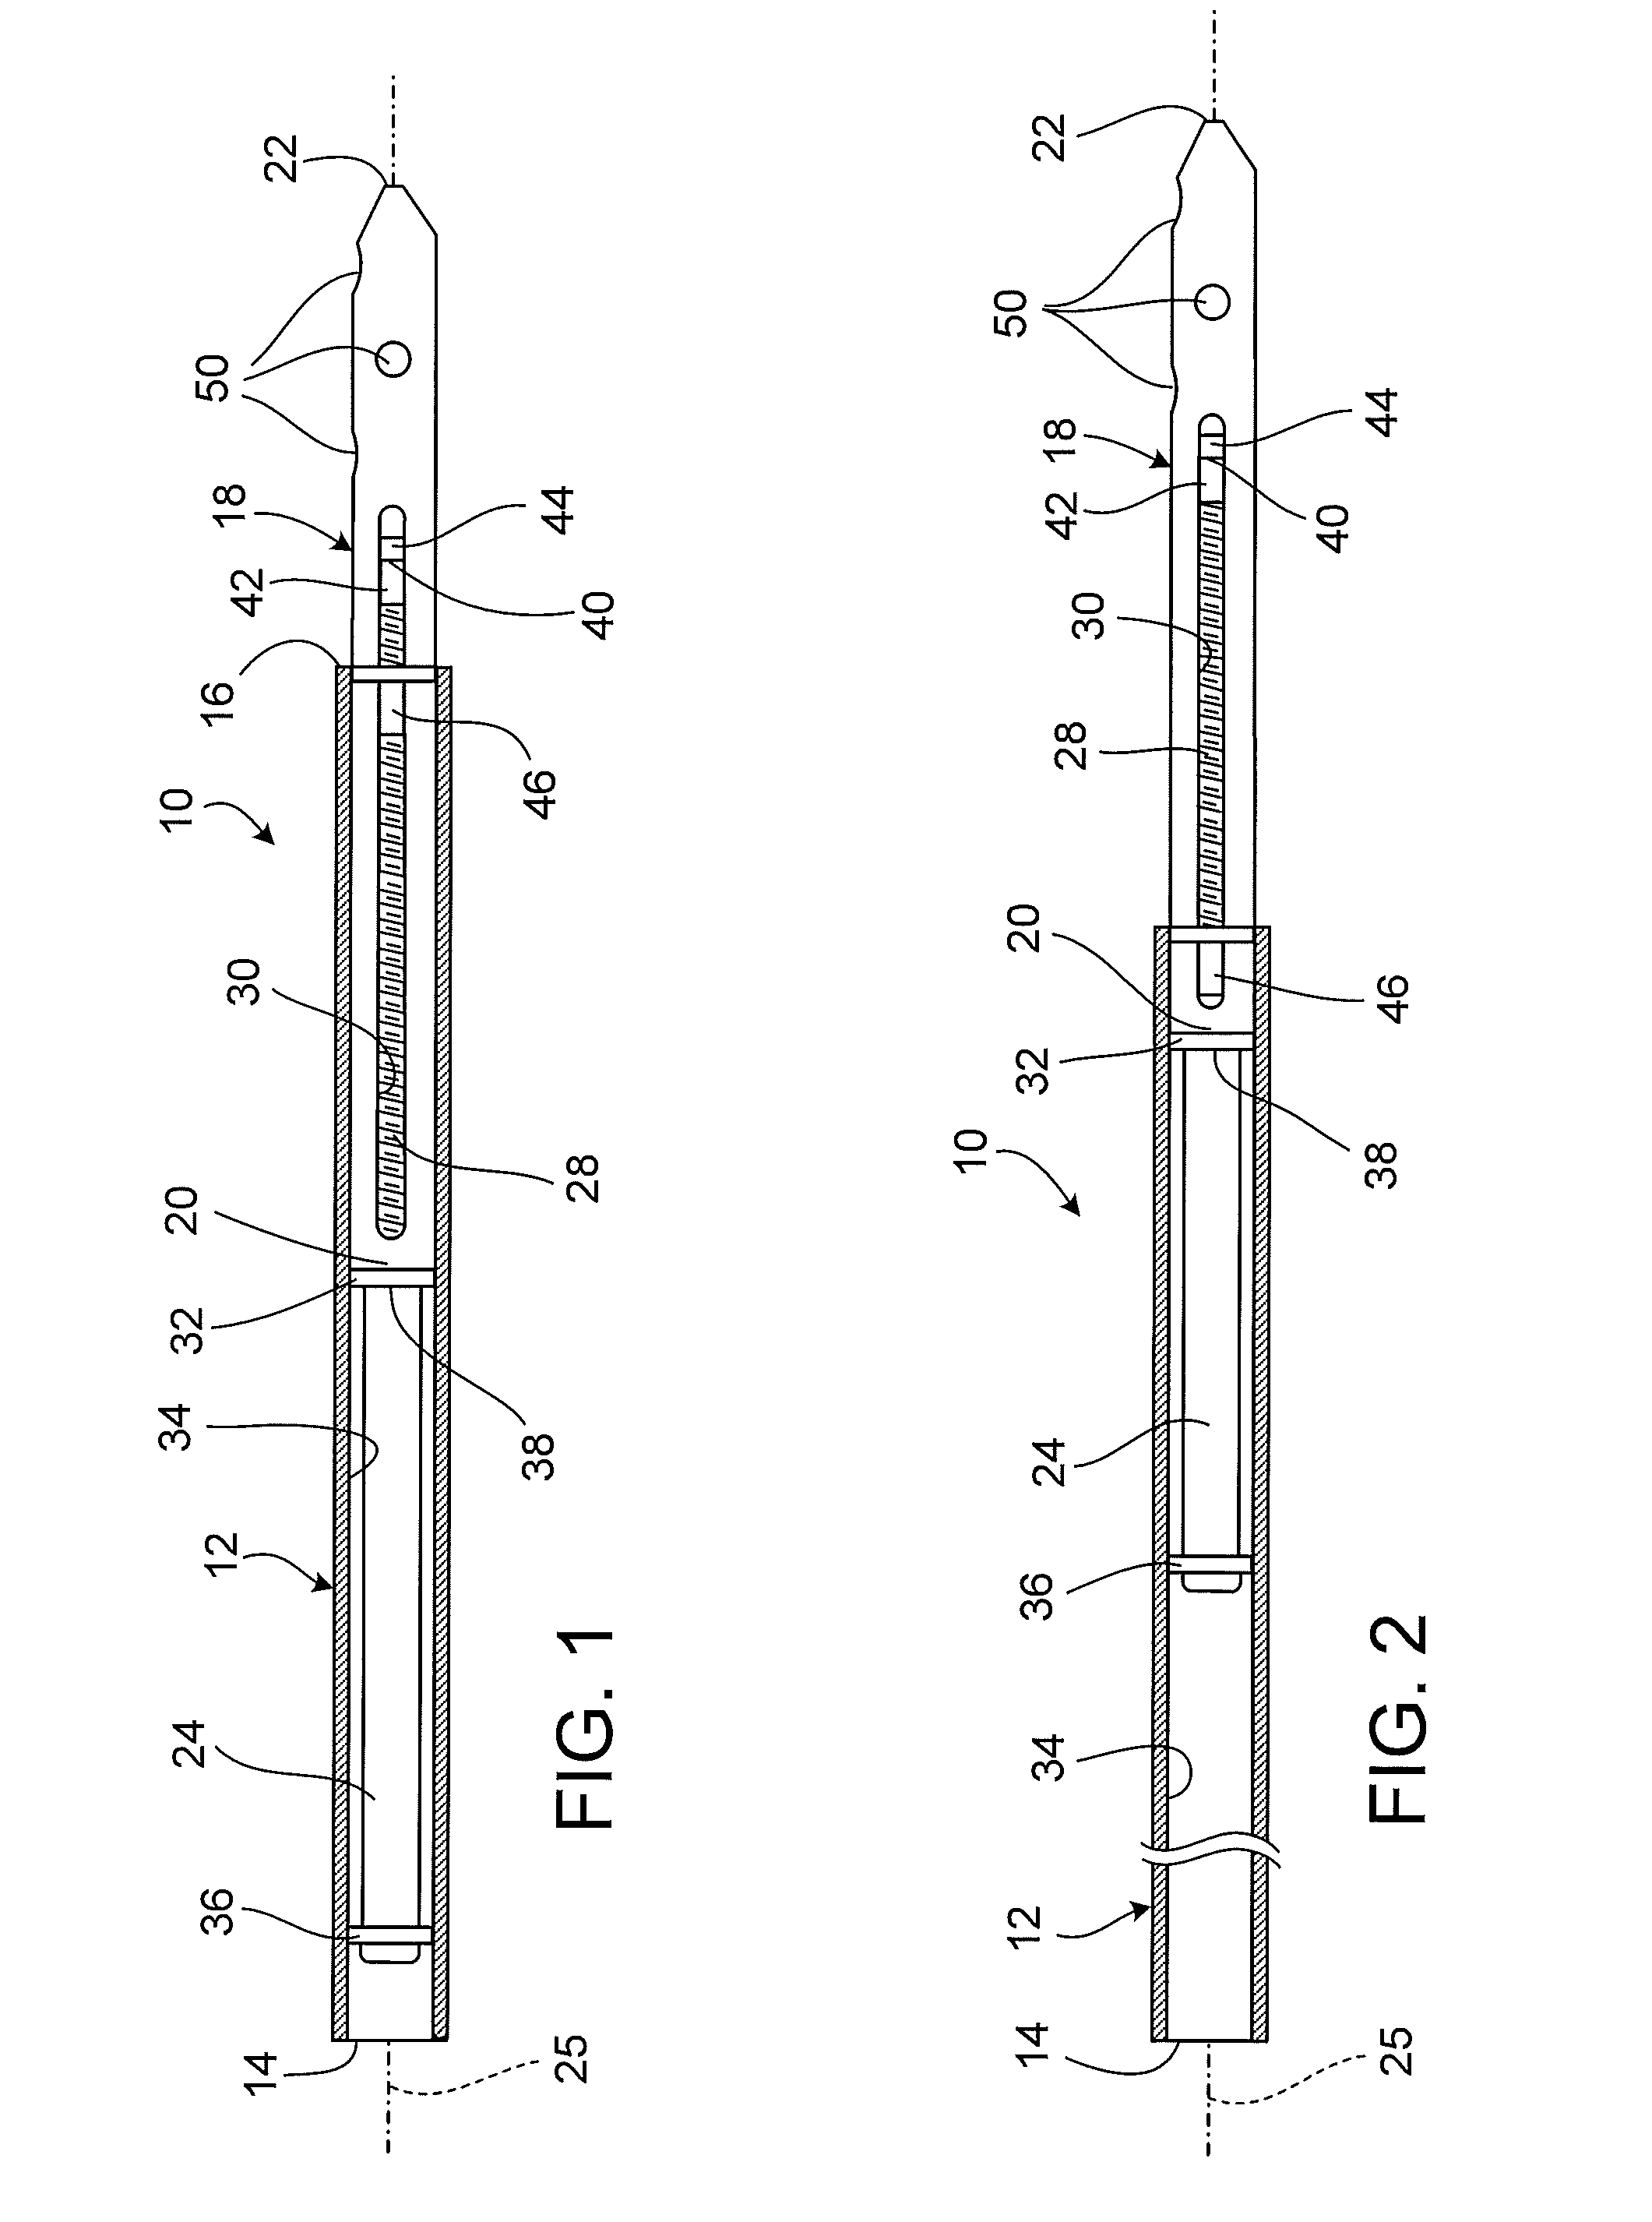 Telescoping IM nail and actuating mechanism